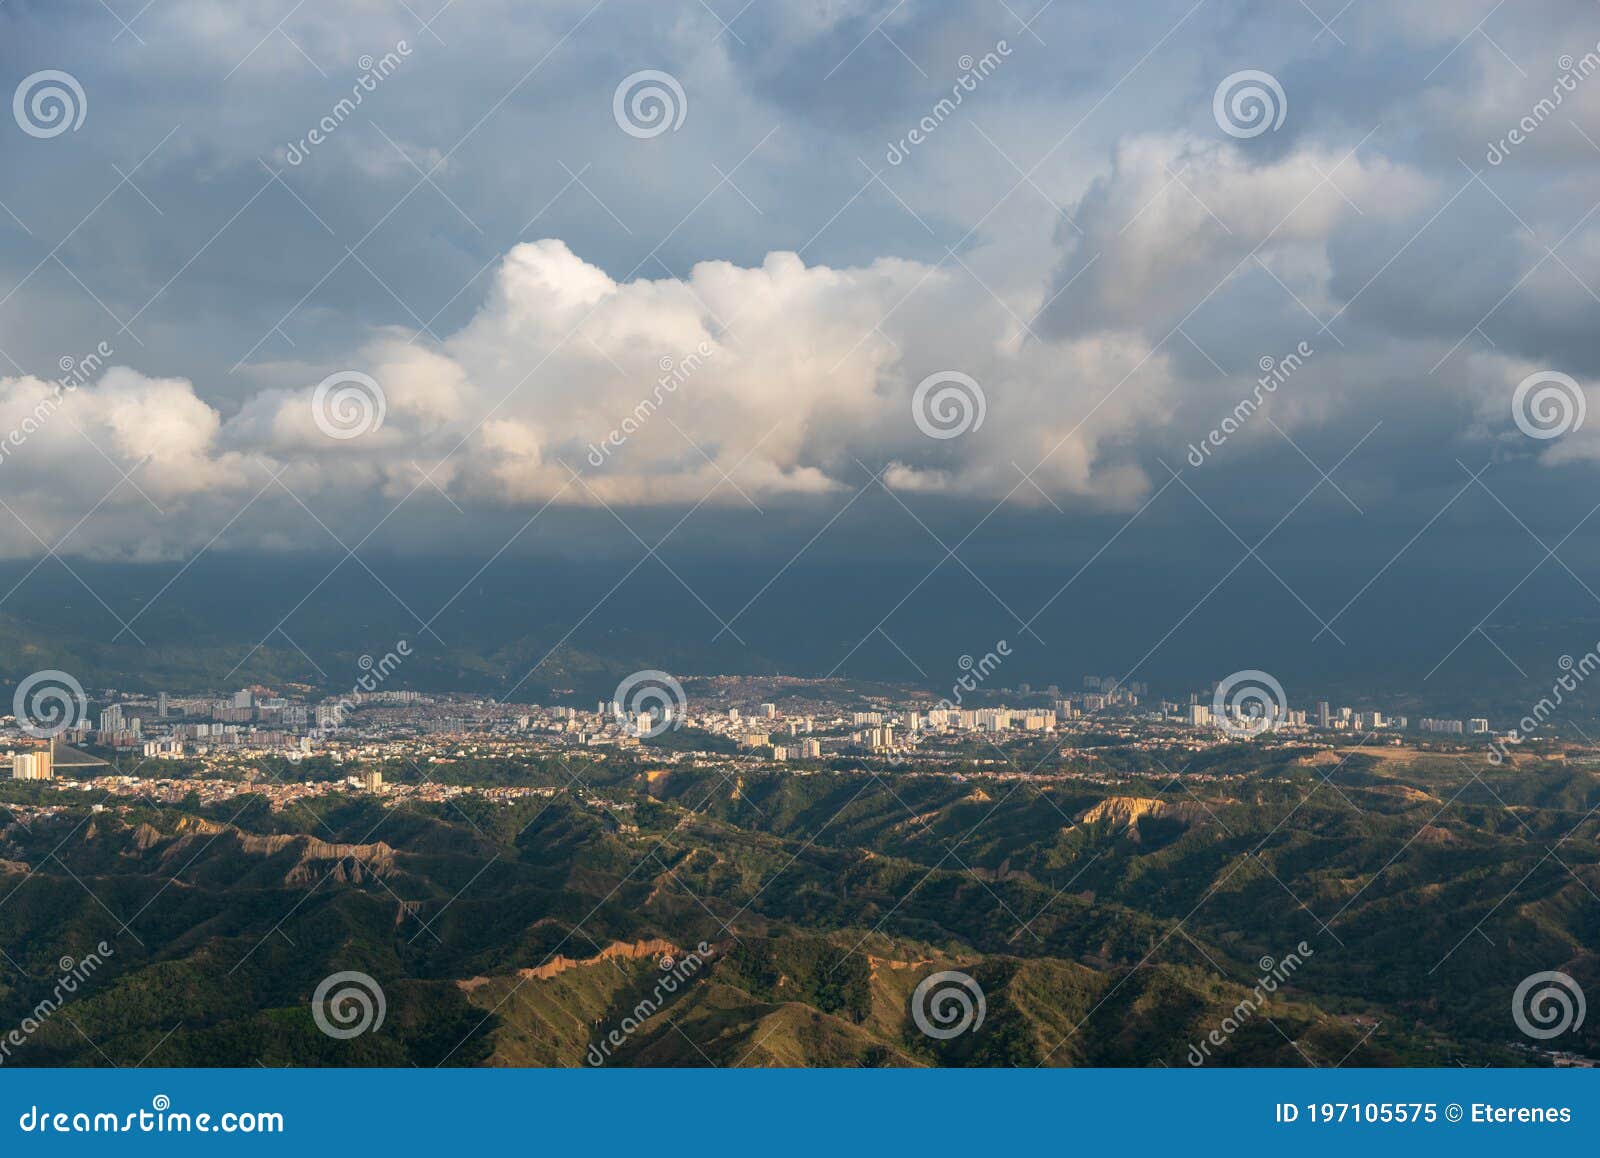 view in the distance of the city of bucaramanga. colombia.